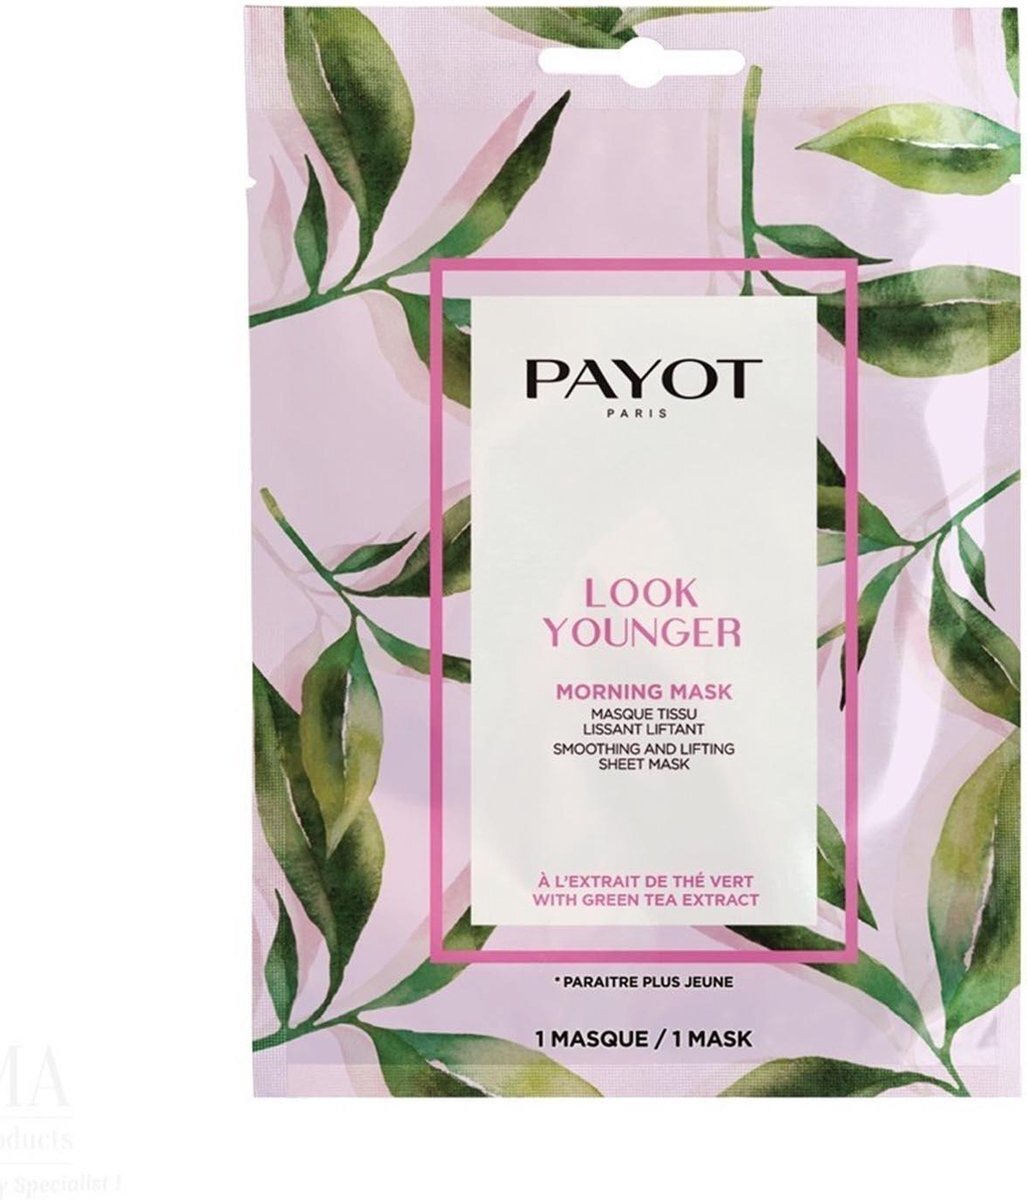 Payot Look Younger Morning Mask